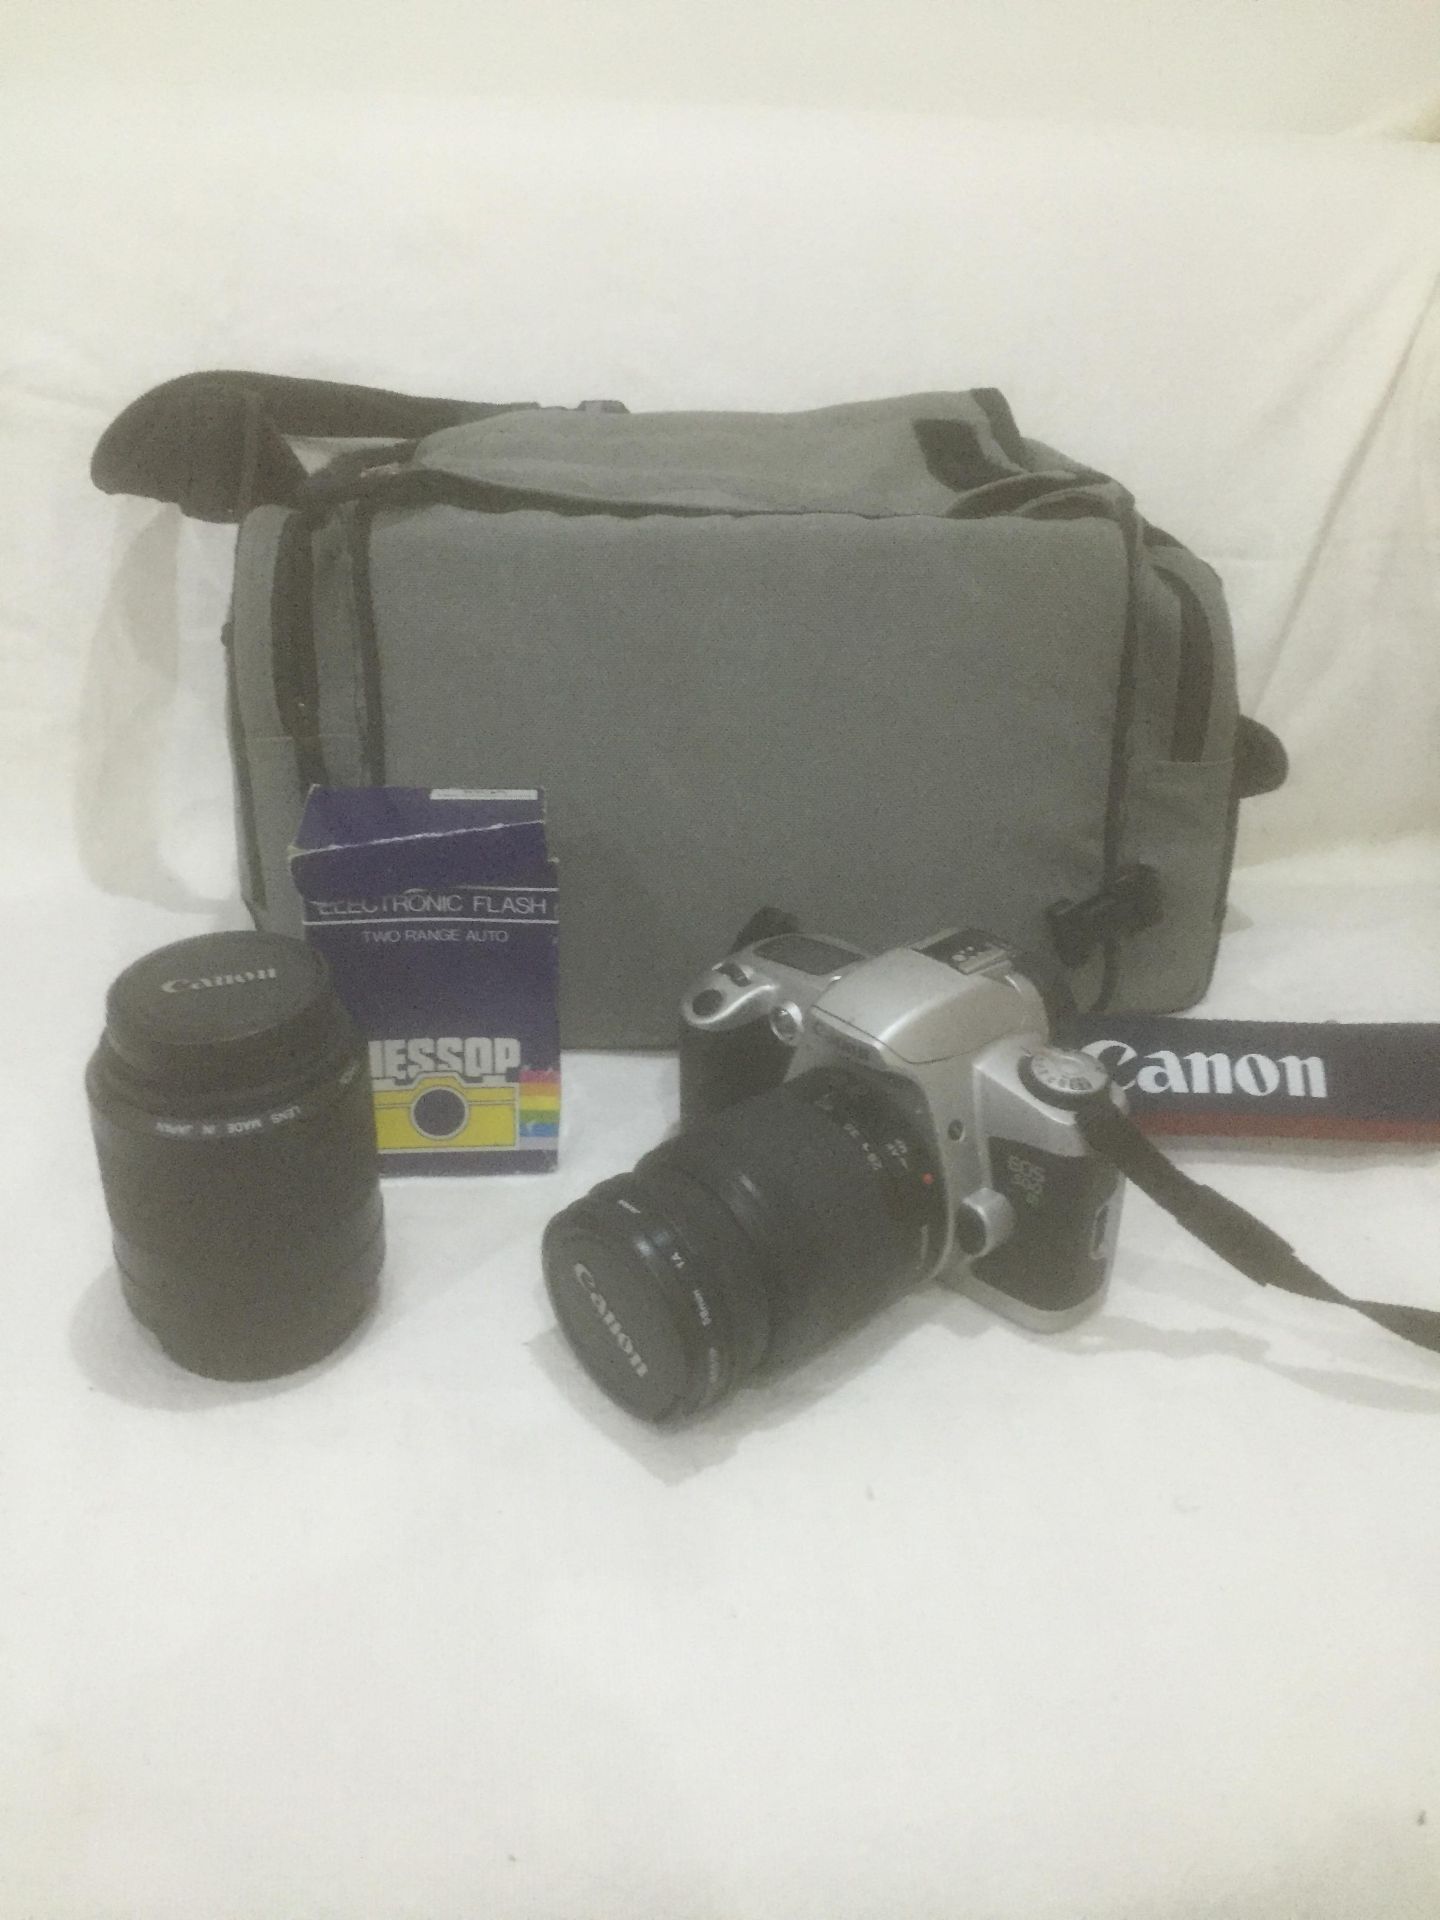 CANON EOS 500N CAMERA WITH ACCESSORIES - USED